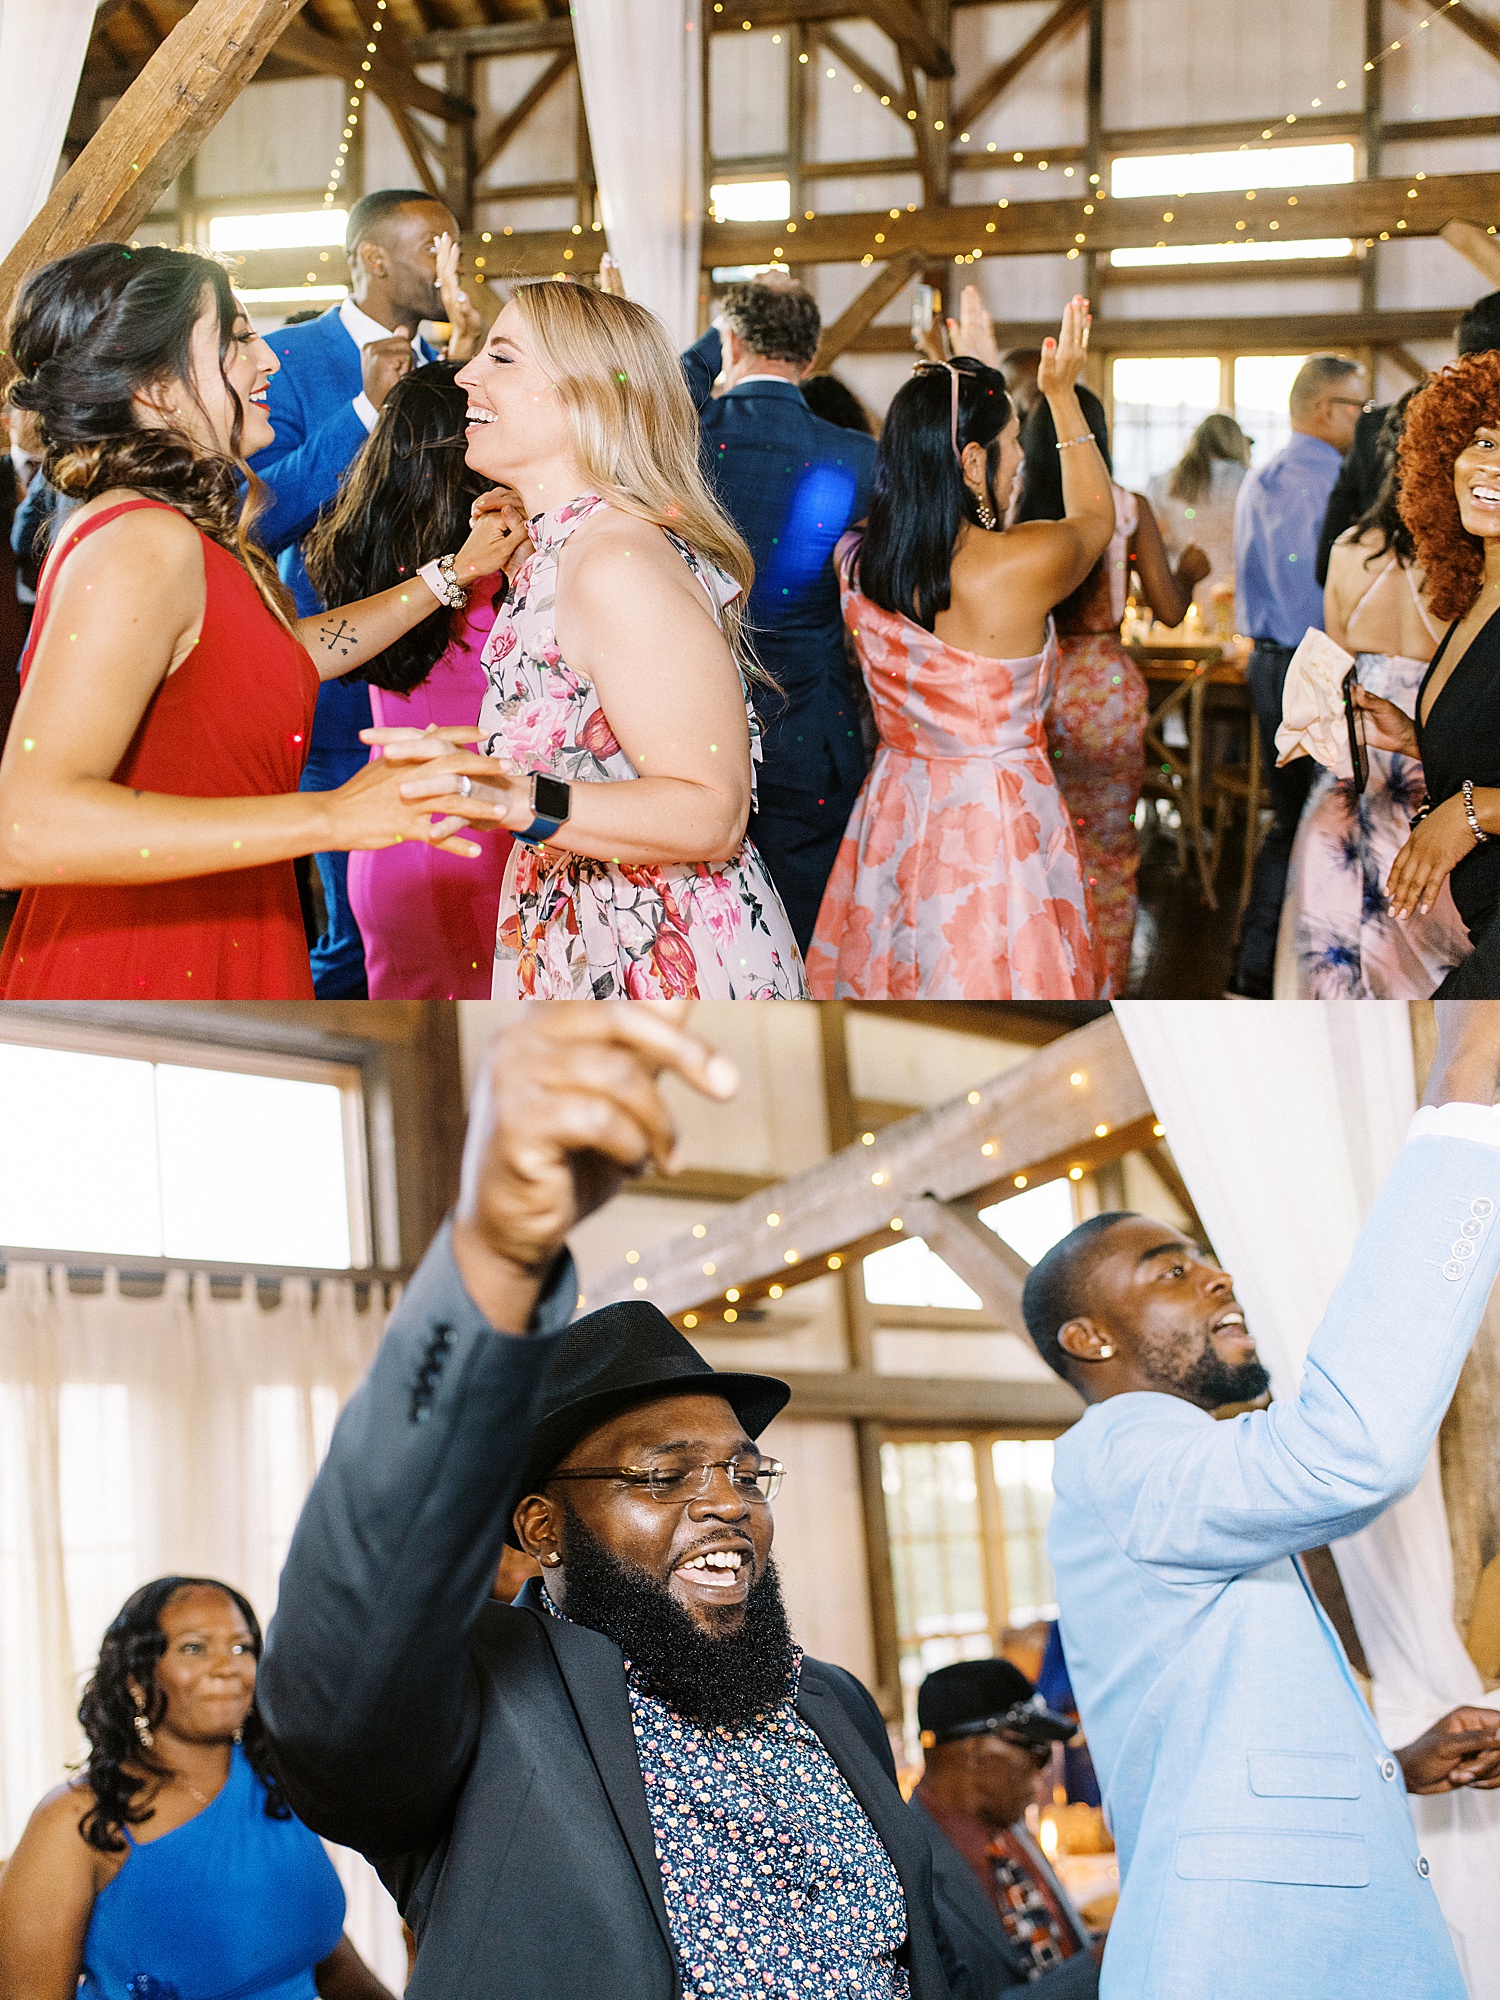 Guests dancing at rustic reception by Lynne Reznick Photography 